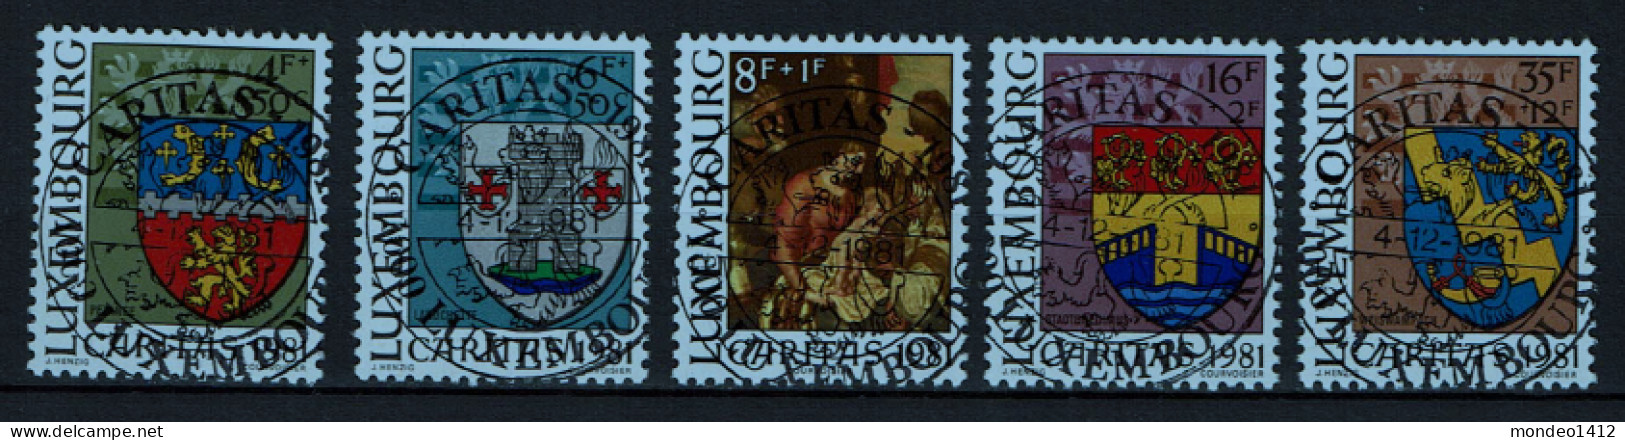 Luxembourg 1981 - YT 991/995 - Town Arms - Caritas Issue, Armoiries Communales, Wappenschilde, Tableau - Usati